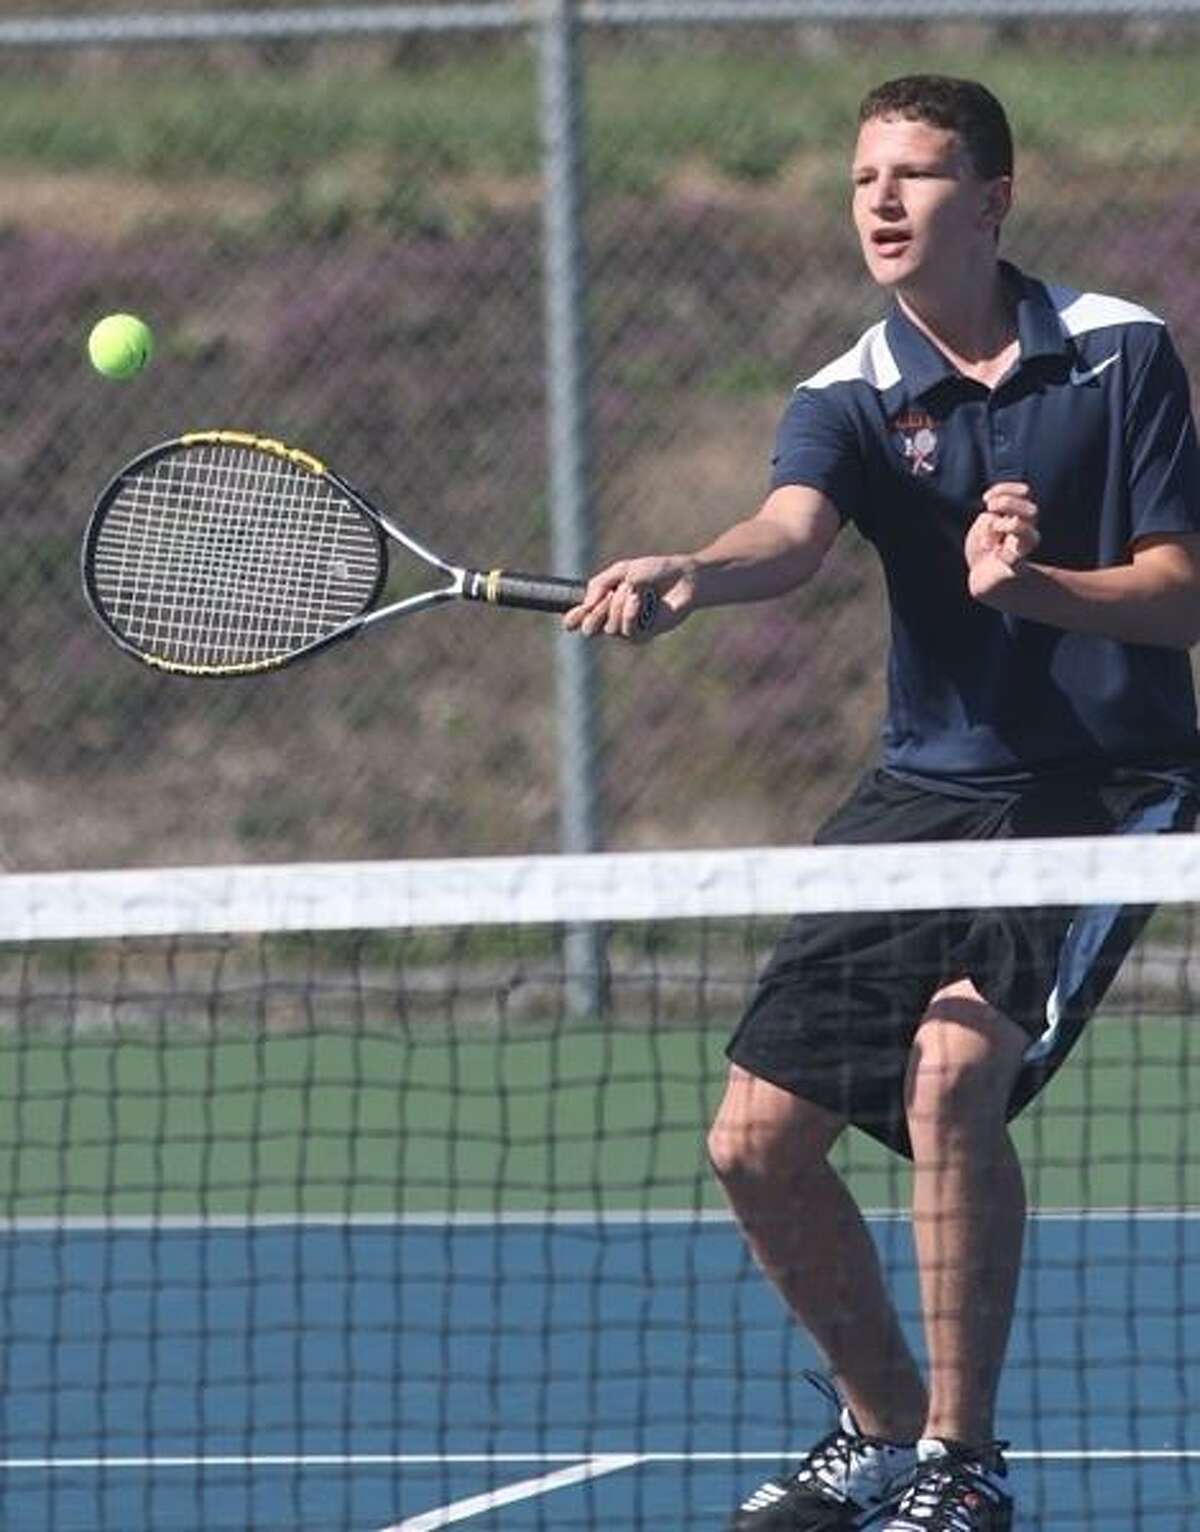 PHOTO BY JOHN HAEGER @ ONEIDAPHOTO ON TWITTER/ONEIDA DAILY DISPATCH Oneida's Jeffrey Coulter returns a shot from Whitesboro's Trevor Kennerknecht during their second singles match at Oneida on Wednesday, April 17, 2013.